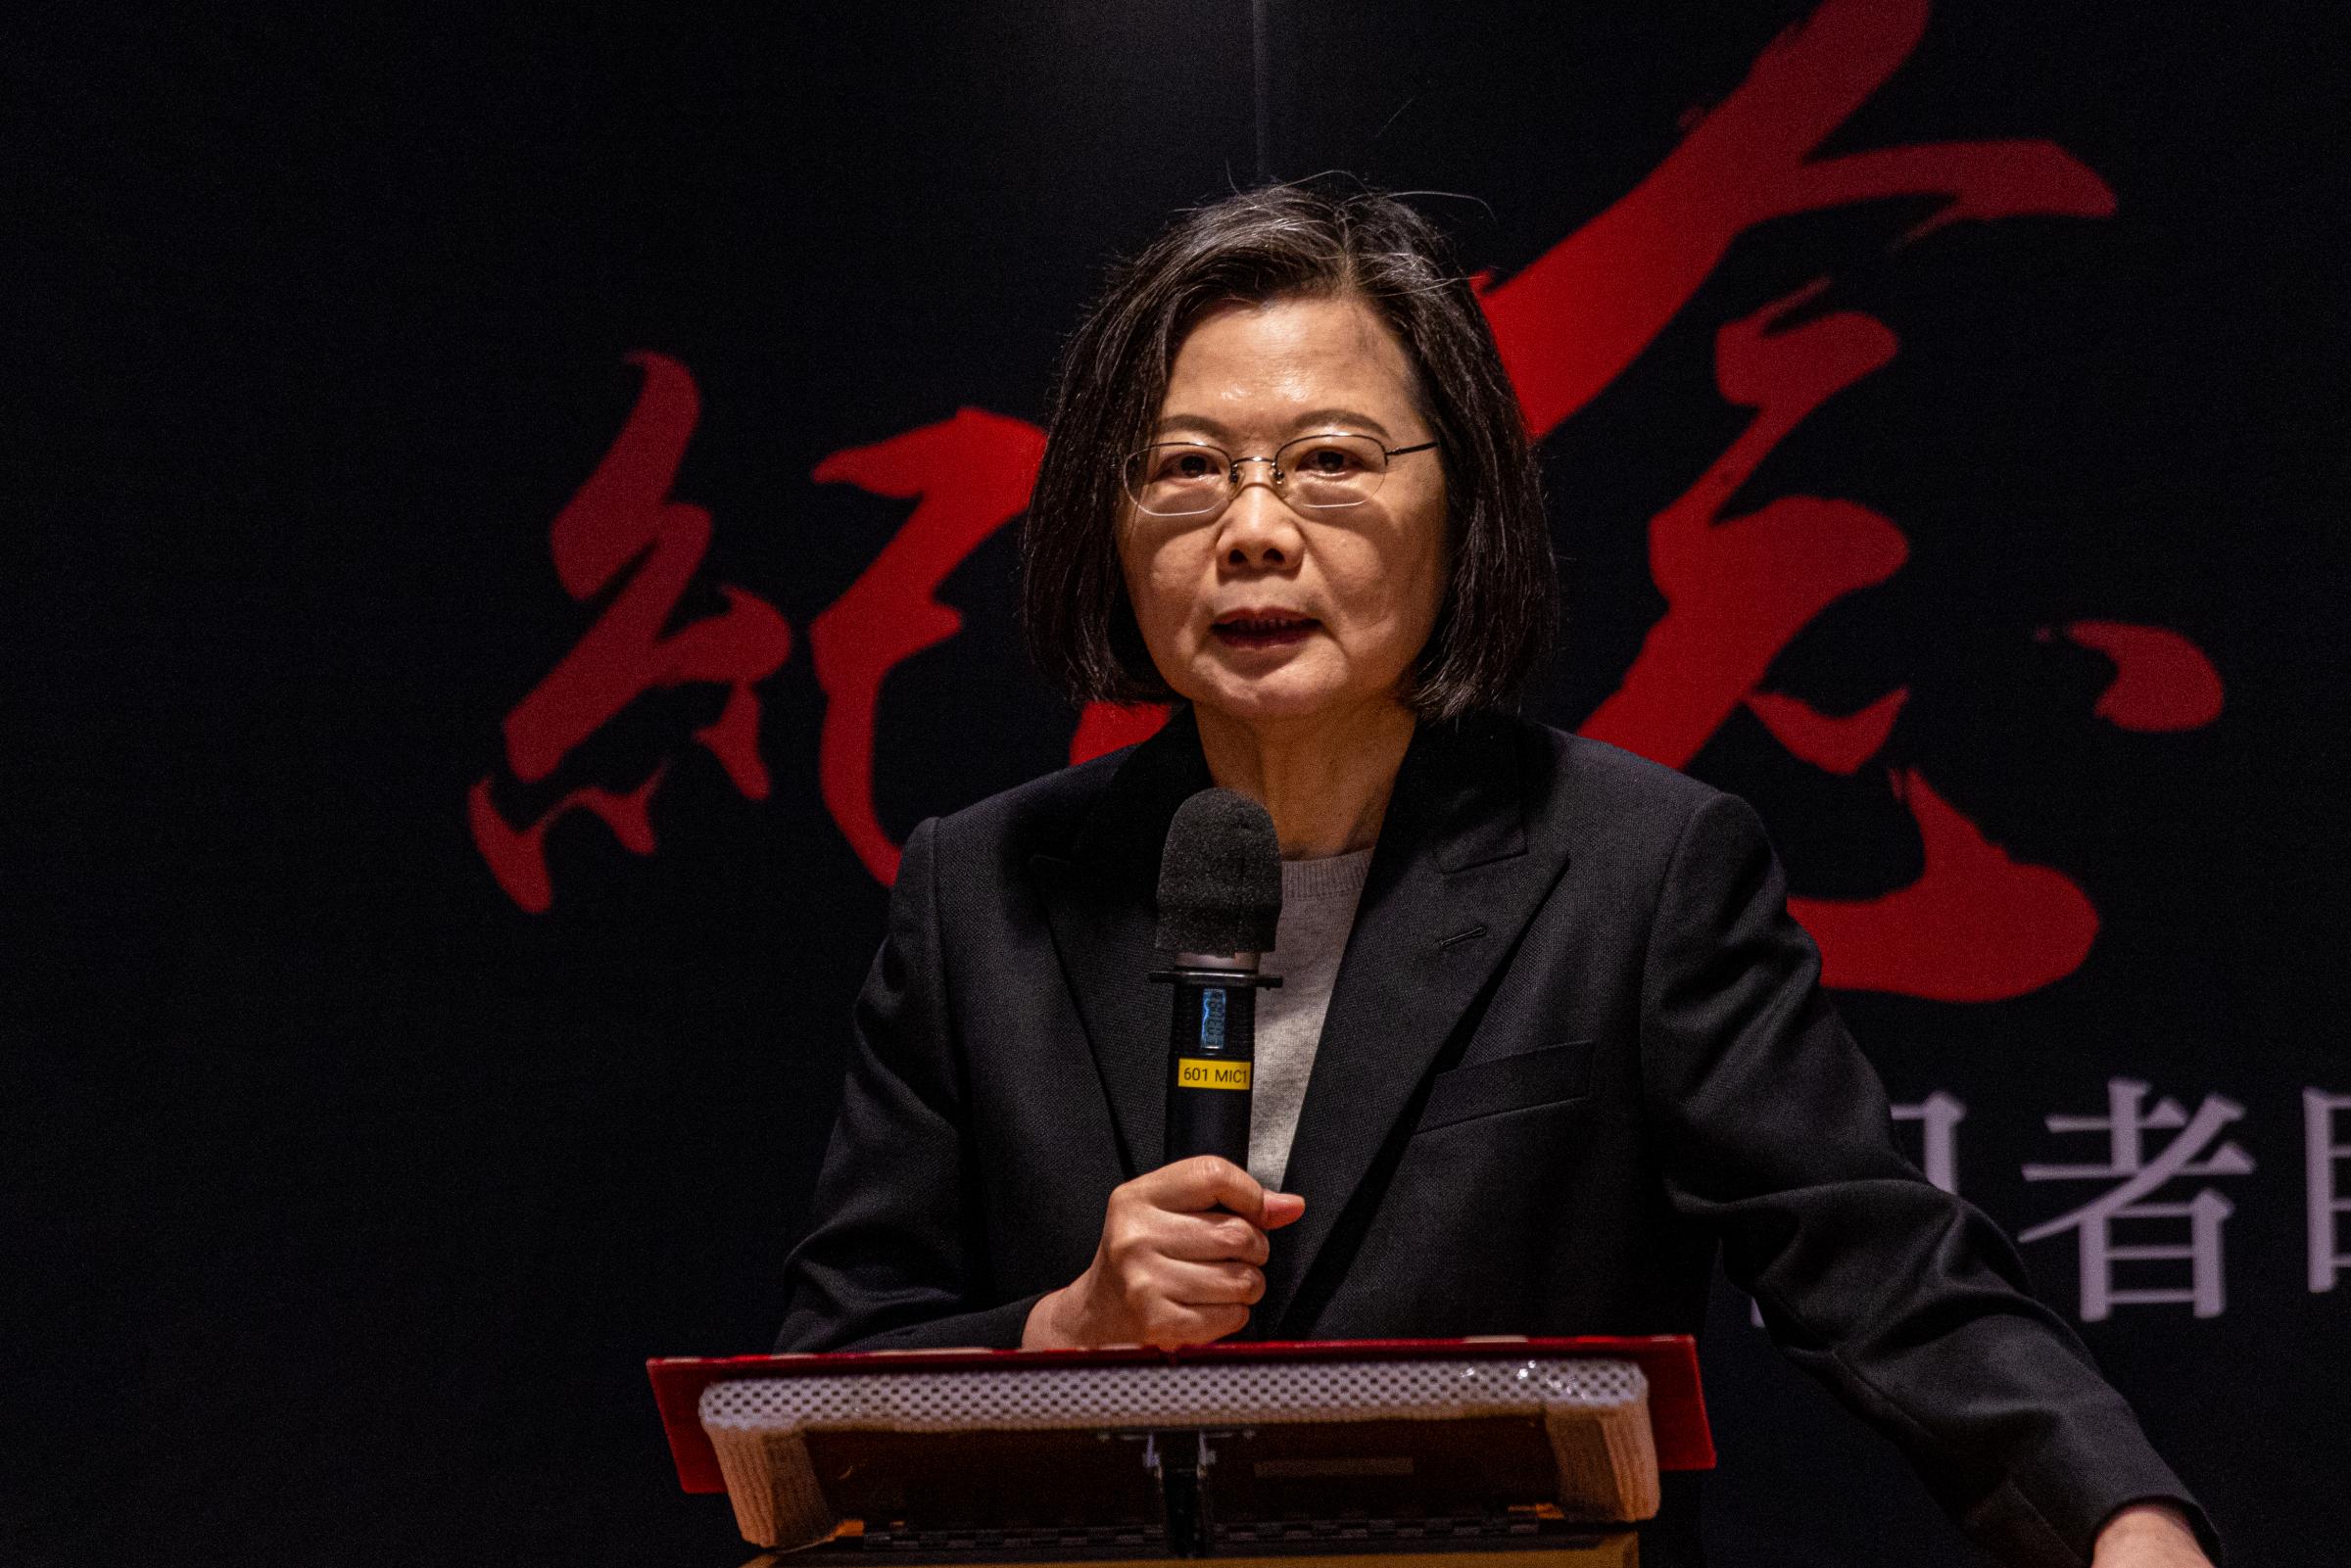 TAIPEI, TAIWAN - MARCH 27: Taiwans President Tsai Ing-wen gives a speech at a memorial event for the late Prime Minister of Japan, Shinzo Abe, on March 27, 2023 in Taipei, Taiwan. Taiwans President Tsai Ing-wen will visit the U.S., as President Biden